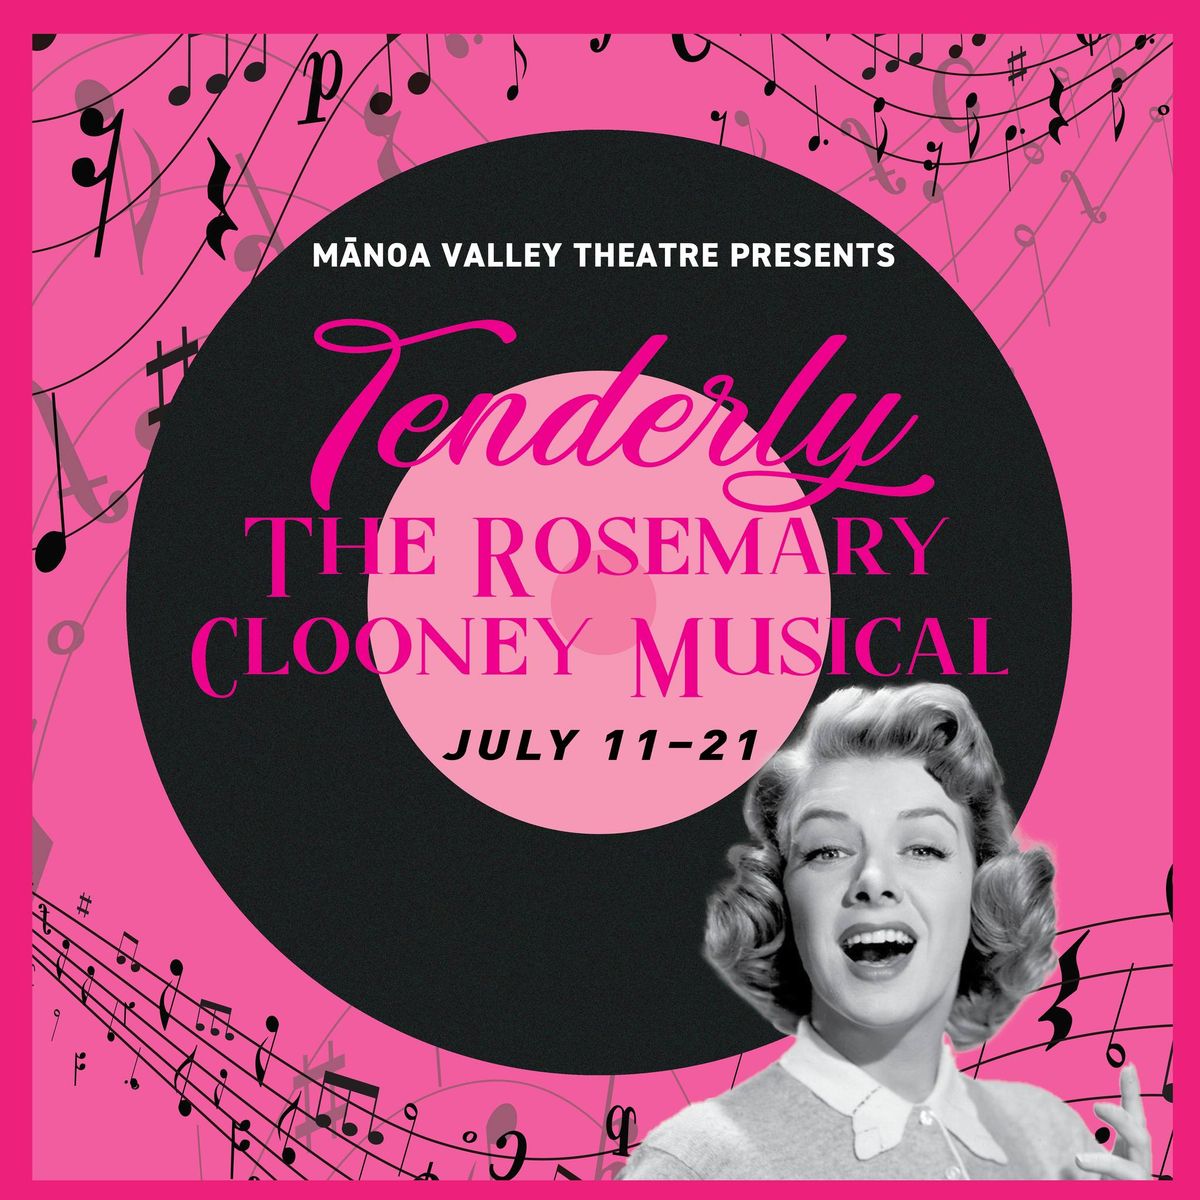 "Tenderly: The Rosemary Clooney Musical"